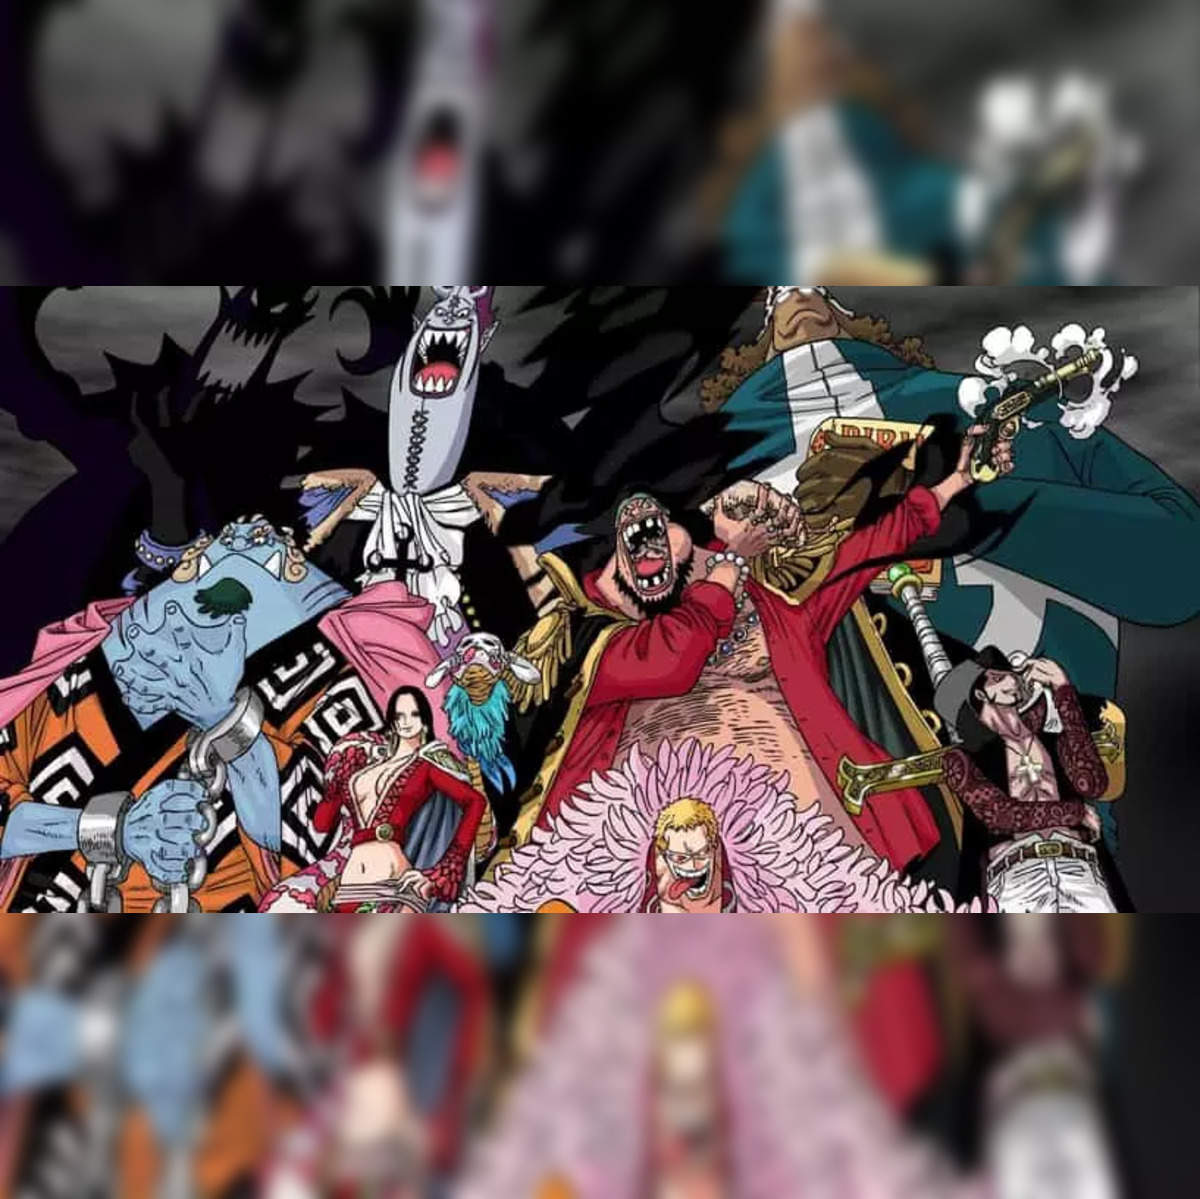 Here's Where To Watch 'One Piece' Online For Free